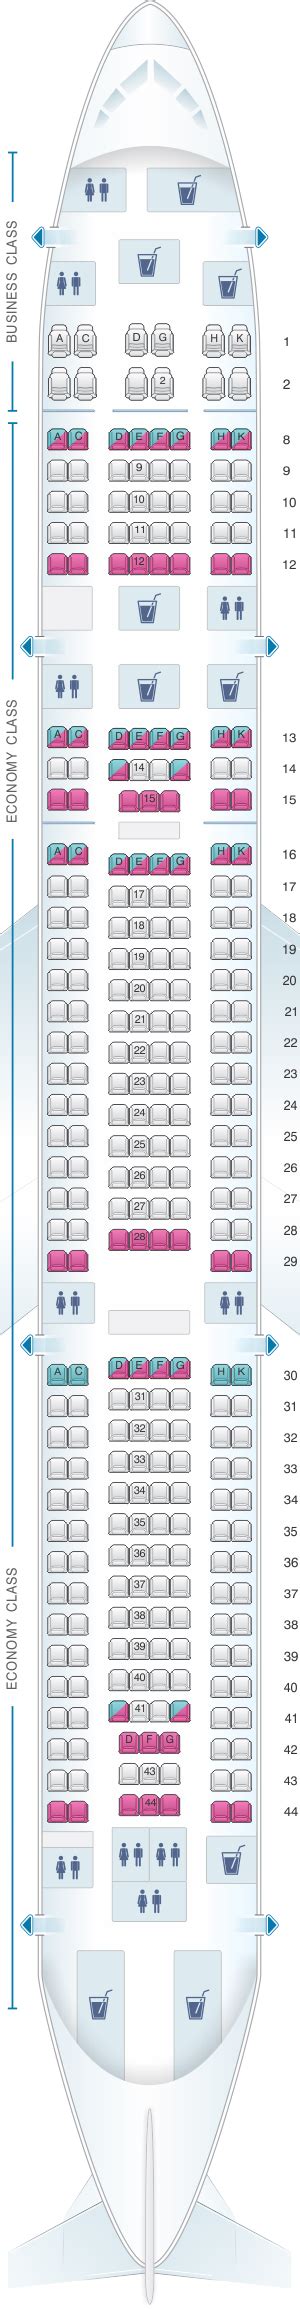 Airbus A340 300 Seating Chart